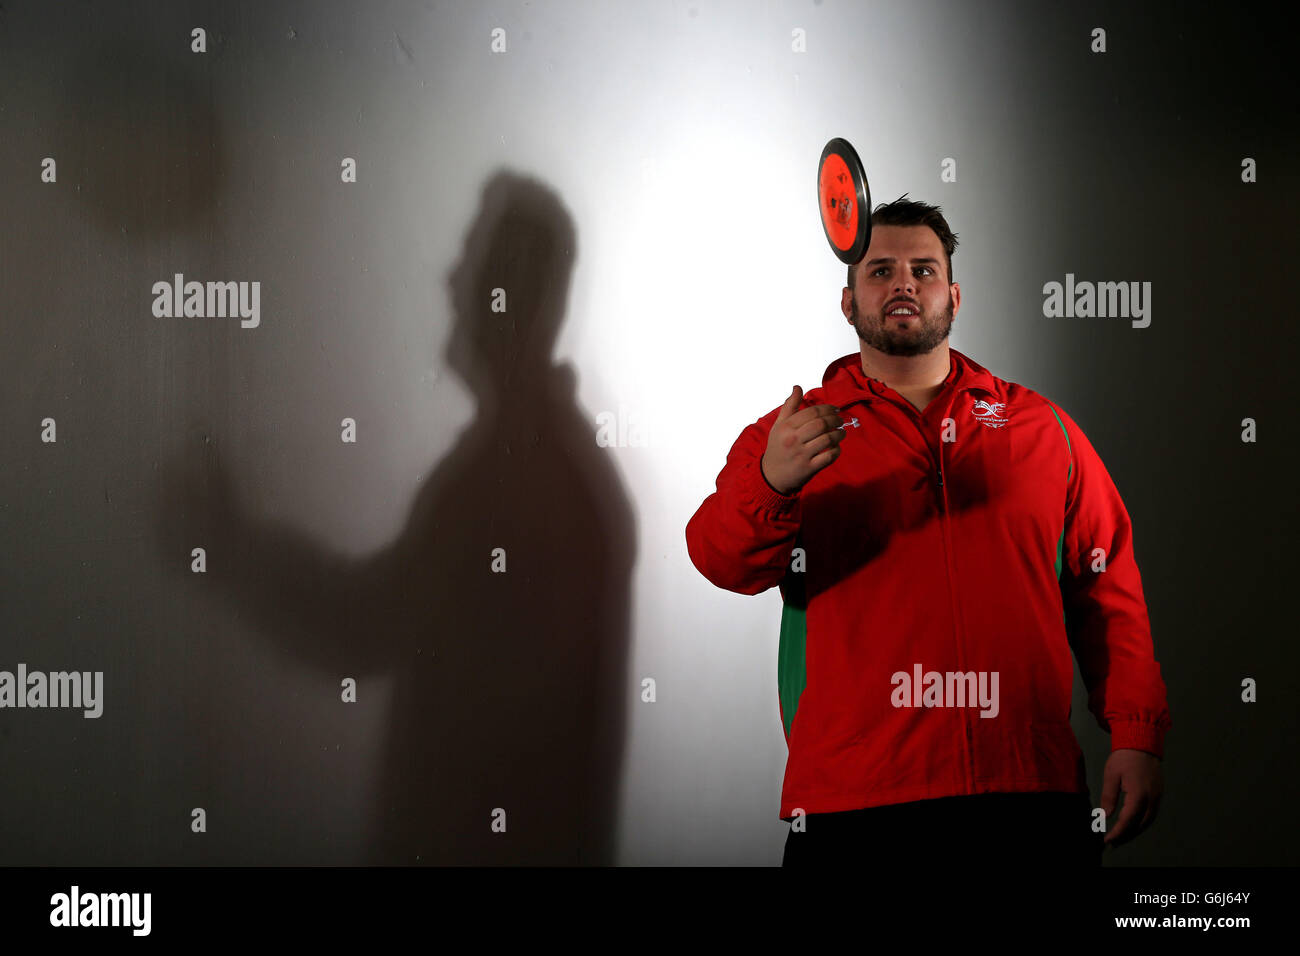 Aled Davies of the Wales discuss Commonwealth team poses for the photographer during the kitting out session at the Millennium Stadium, Cardiff. Stock Photo